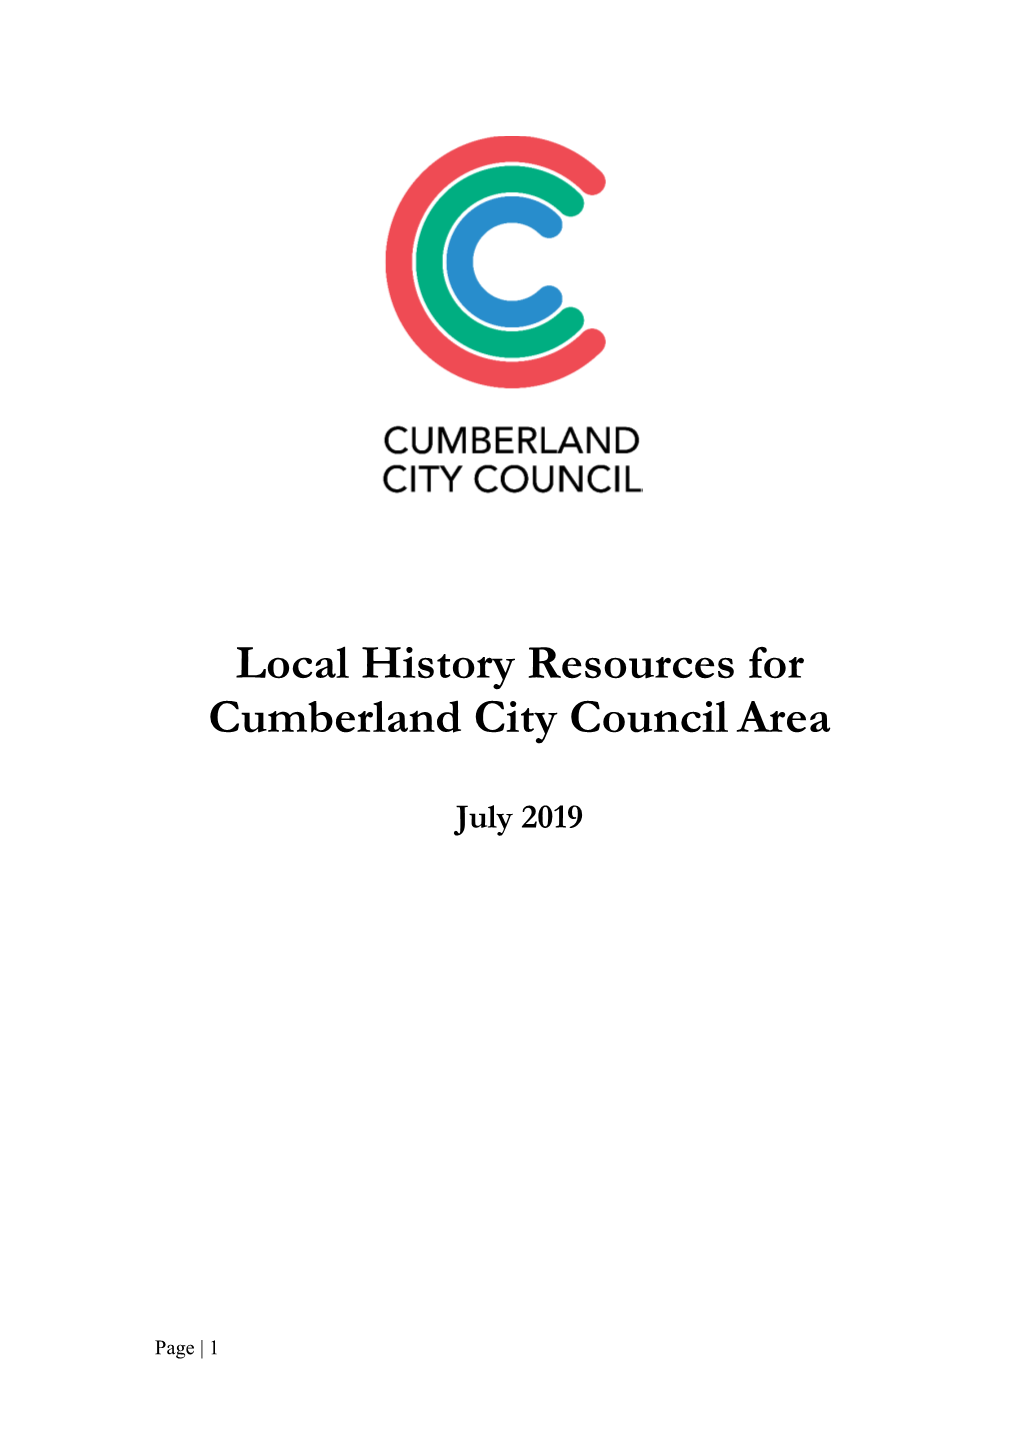 Local History Resources for Cumberland City Council Area